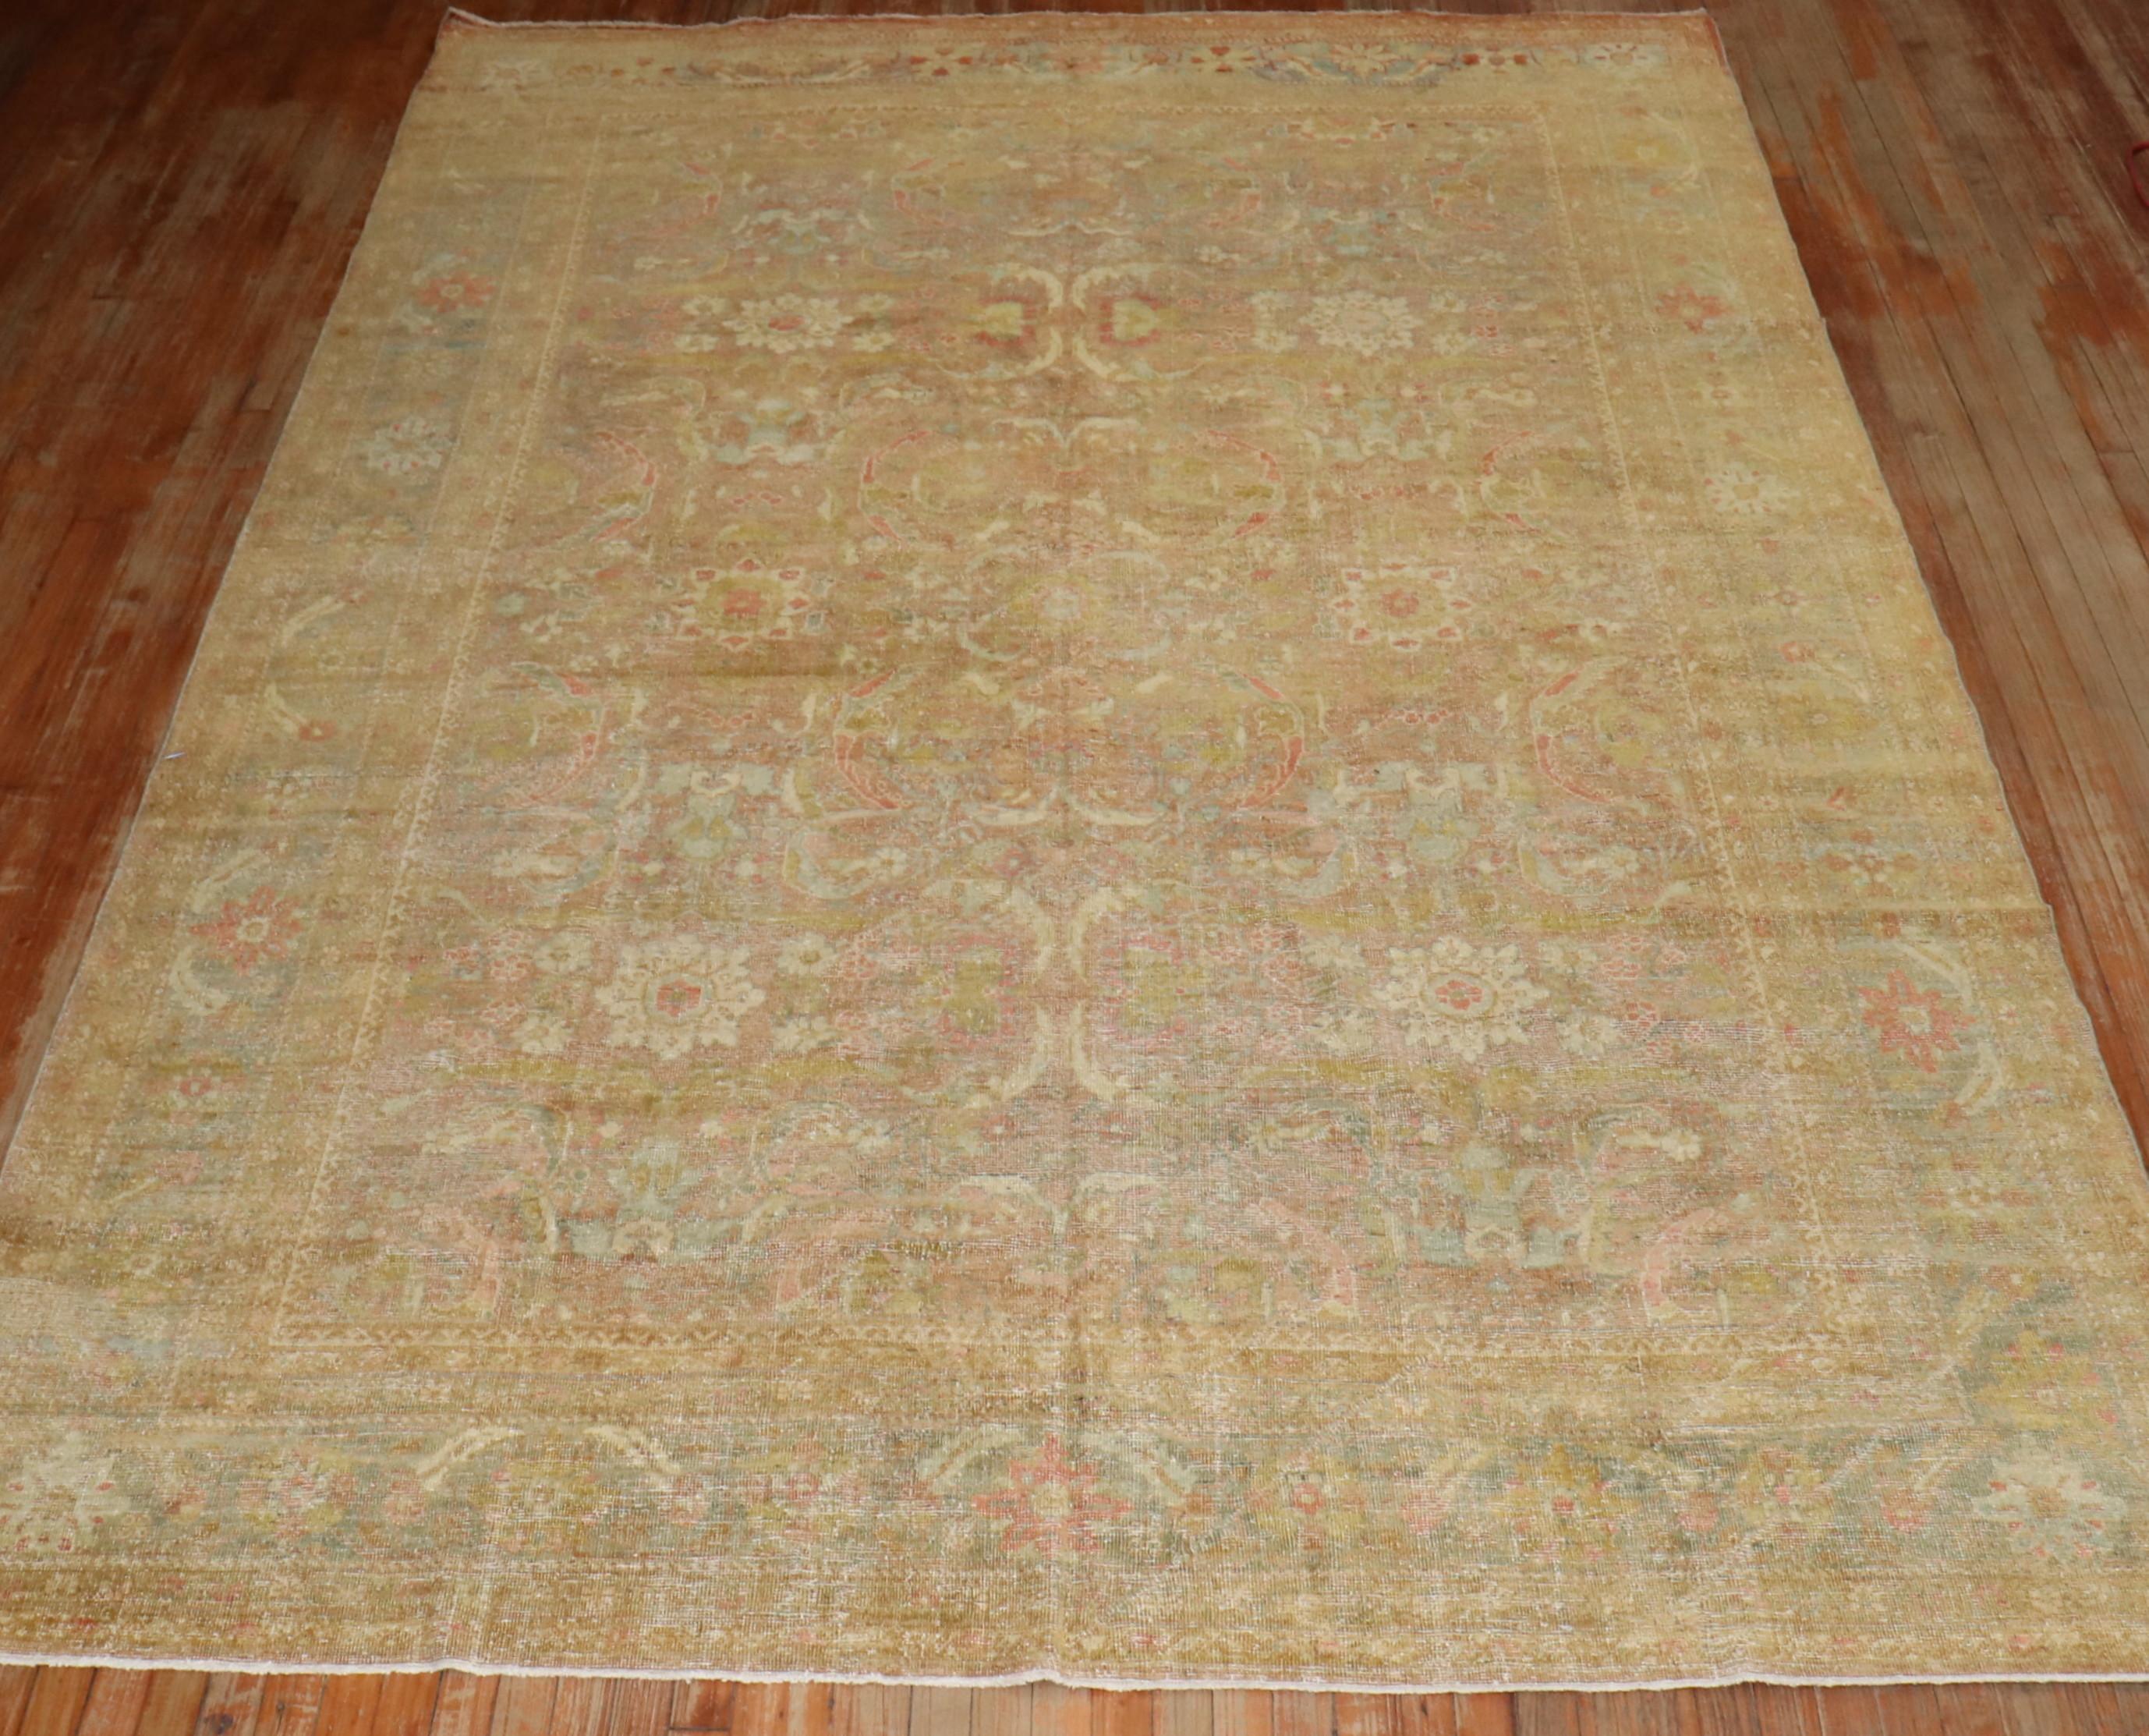 A One of a Kind Antique early 20th century Persian Mahal rug with beautiful Variations in color and design which is often phrased as lazy lines.
Lazy lines are a slanted break in a color and/or in the design elements of a rug intended by the weaver